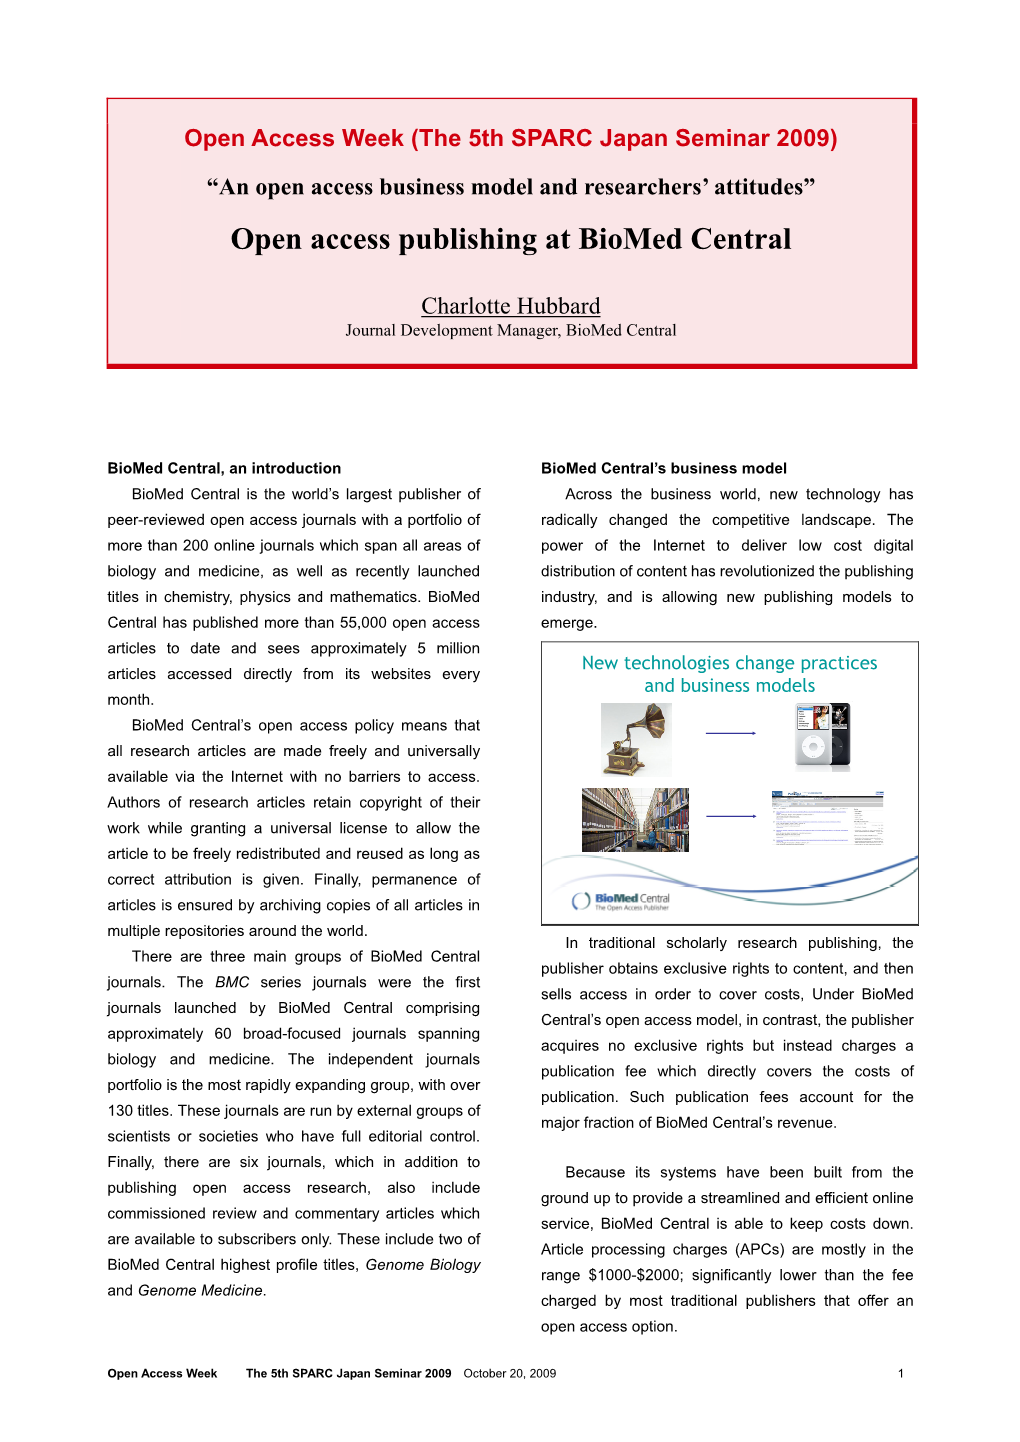 Open Access Publishing at Biomed Central